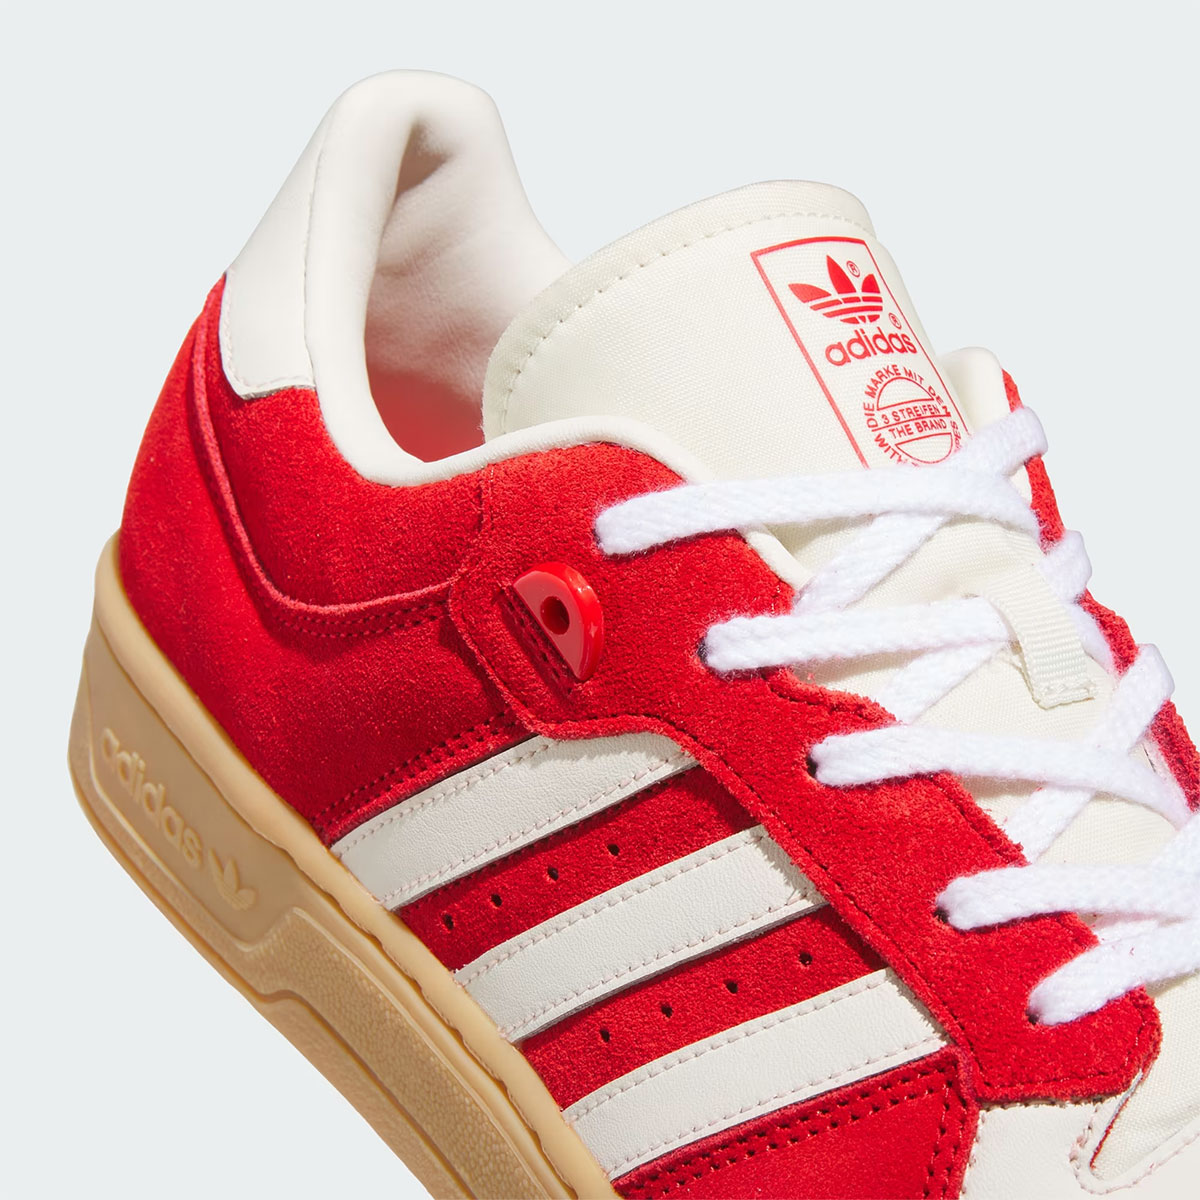 Adidas Rivalry 86 Low Better Scarlet Ivory Gum Id8410 7